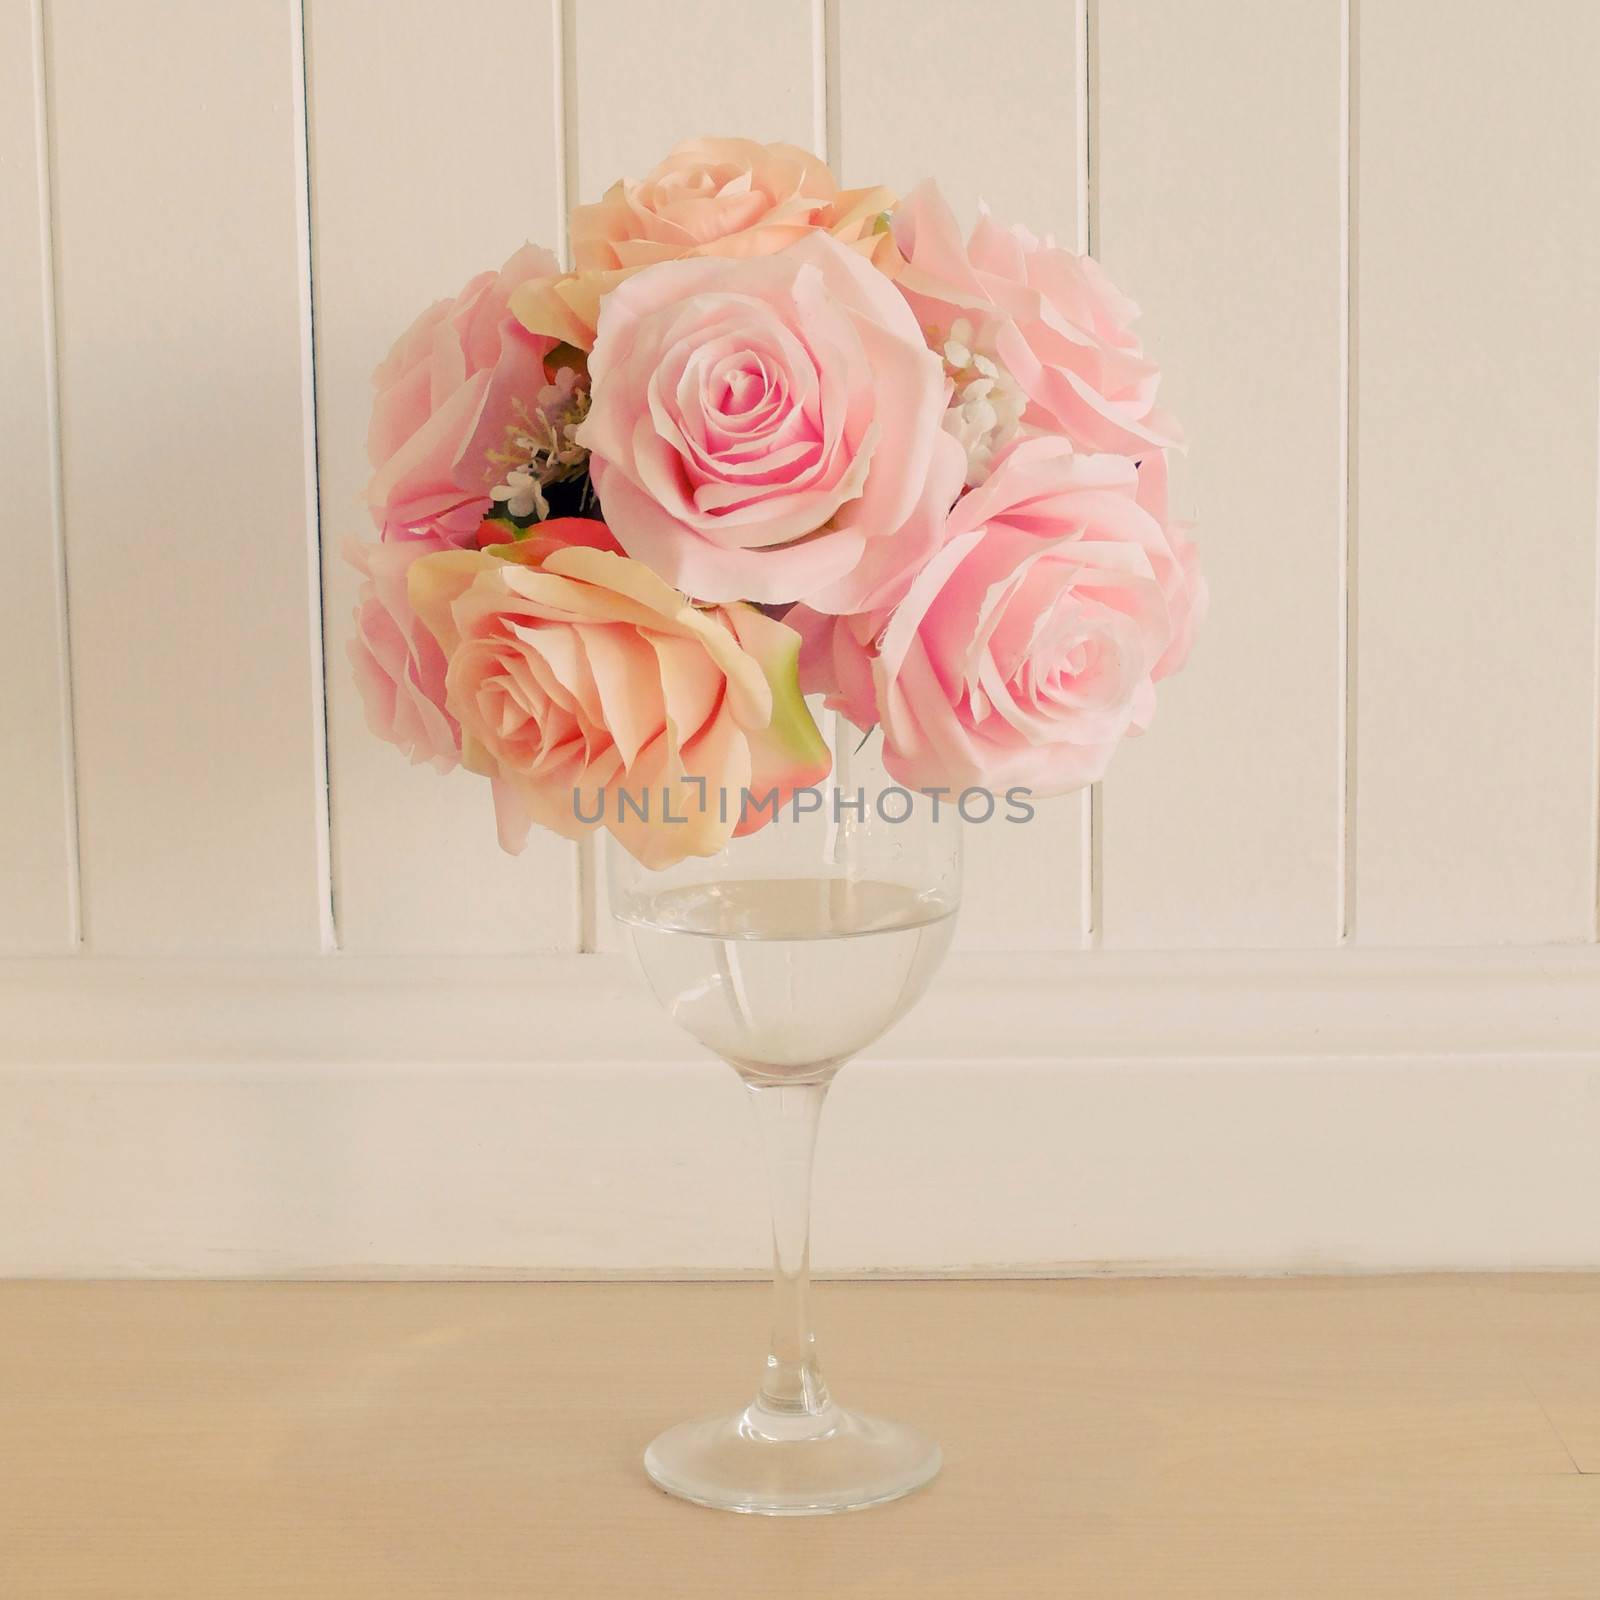 Bunch of rose in glass for decoration with retro filter effect